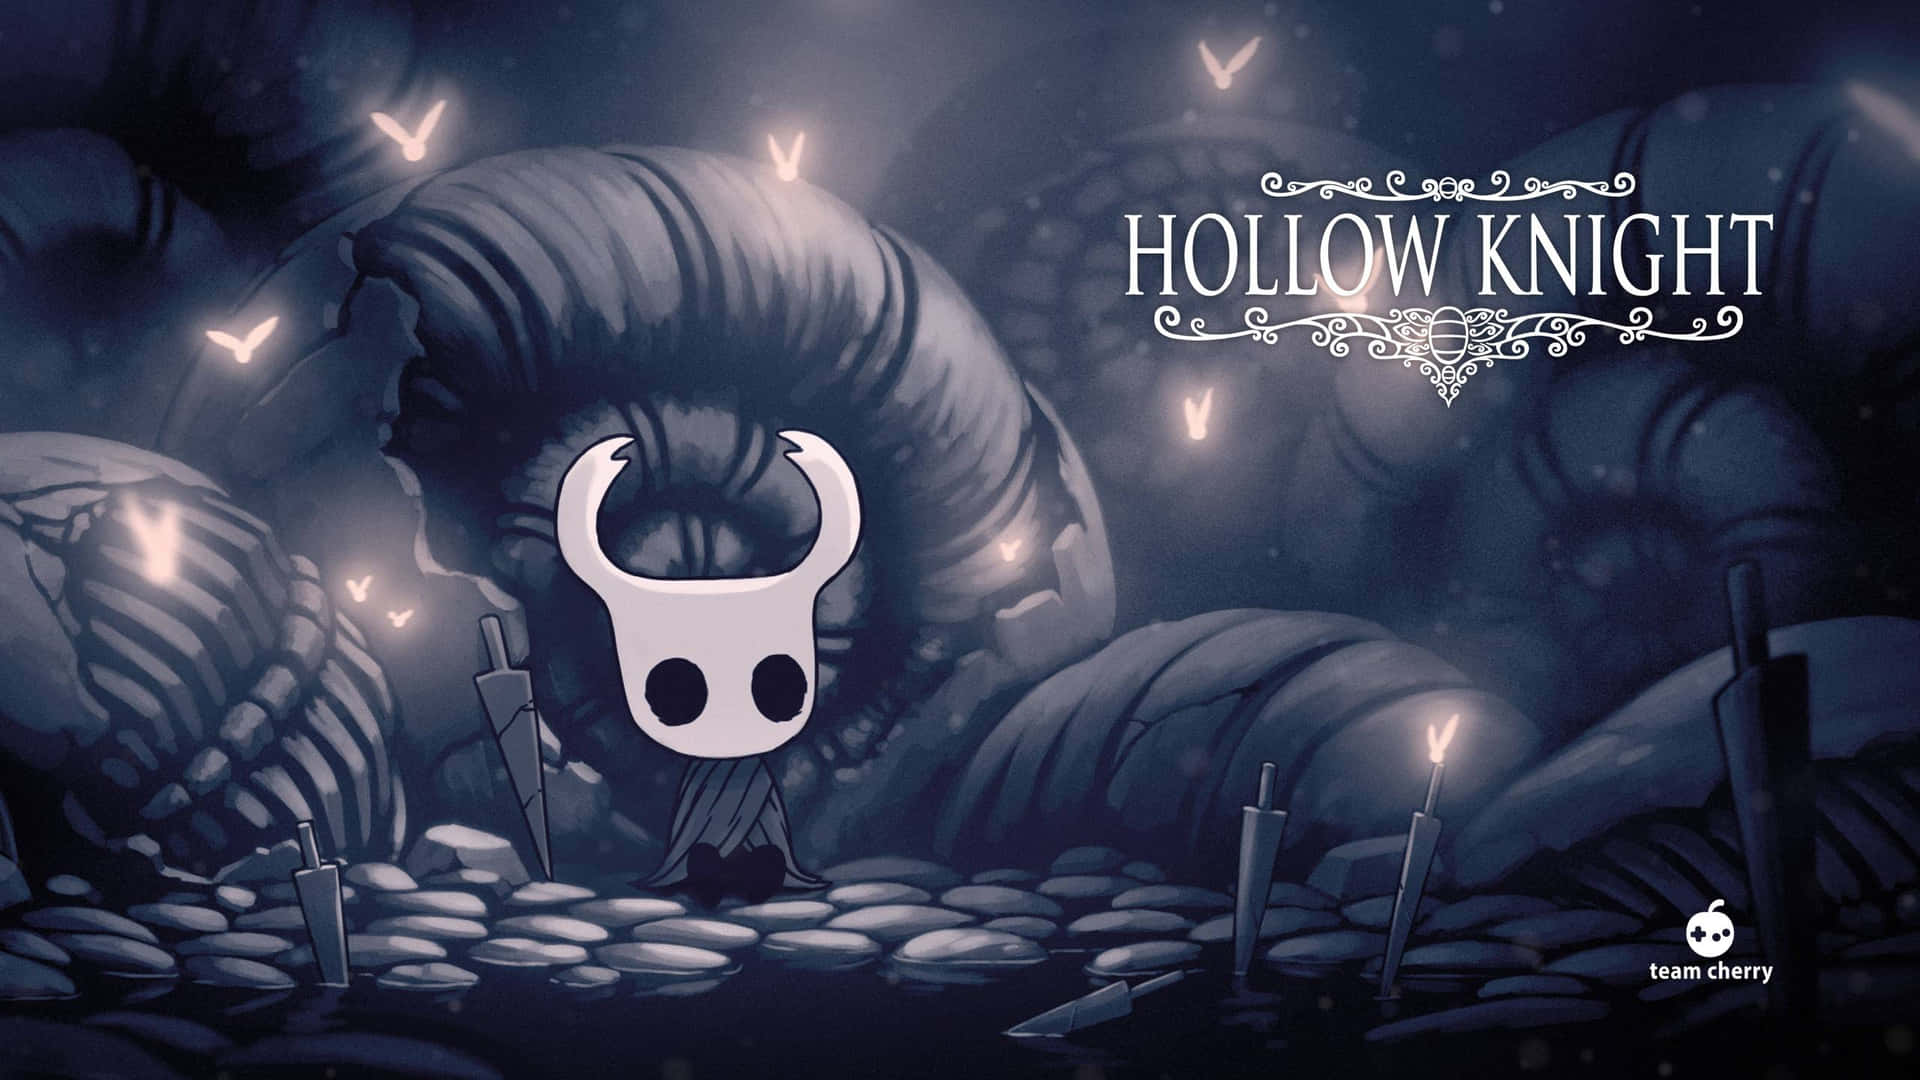 Set off on an adventure of exploration and battle with Hollow Knight